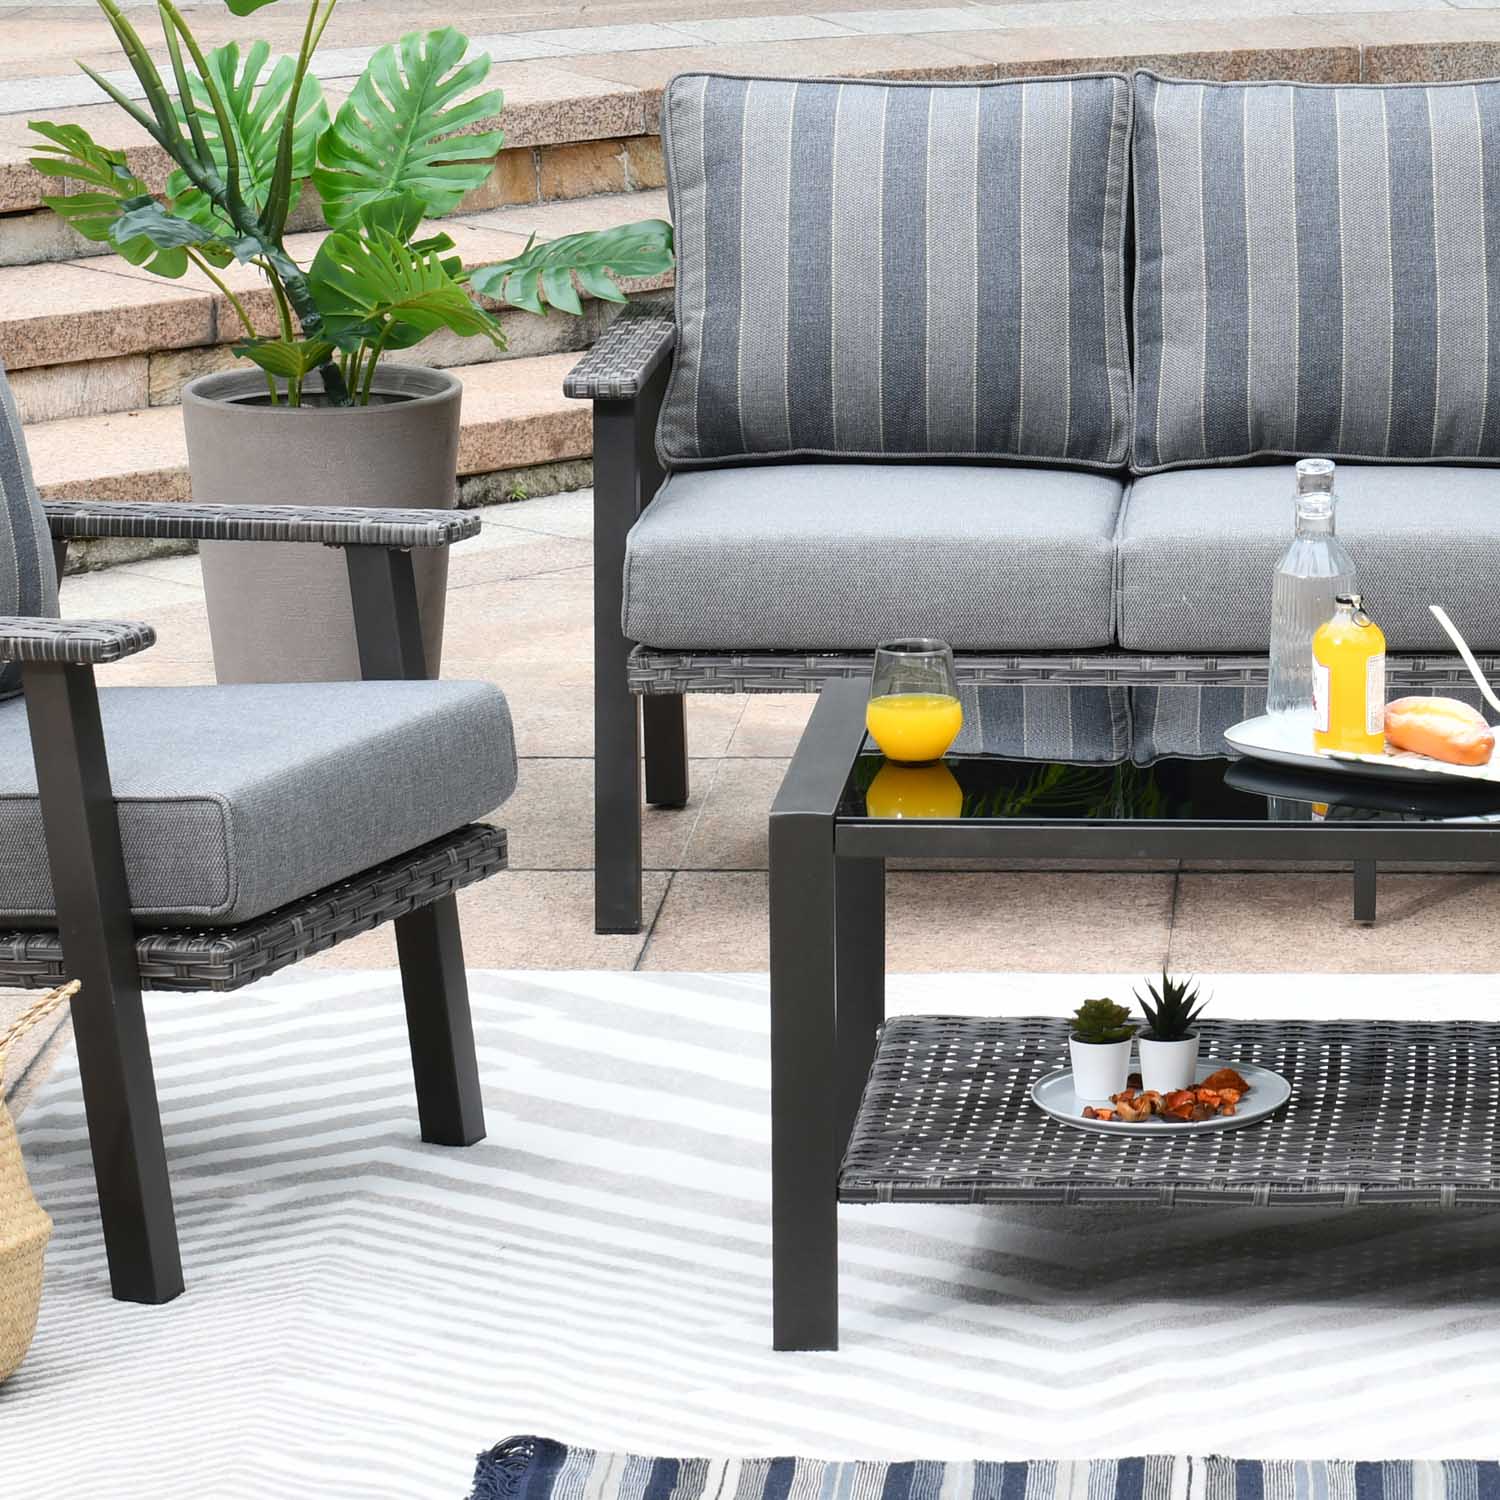 Ovios Patio Conversation Set 5 Person Seating with Table, 5'' Cushion, Olefin Fabric